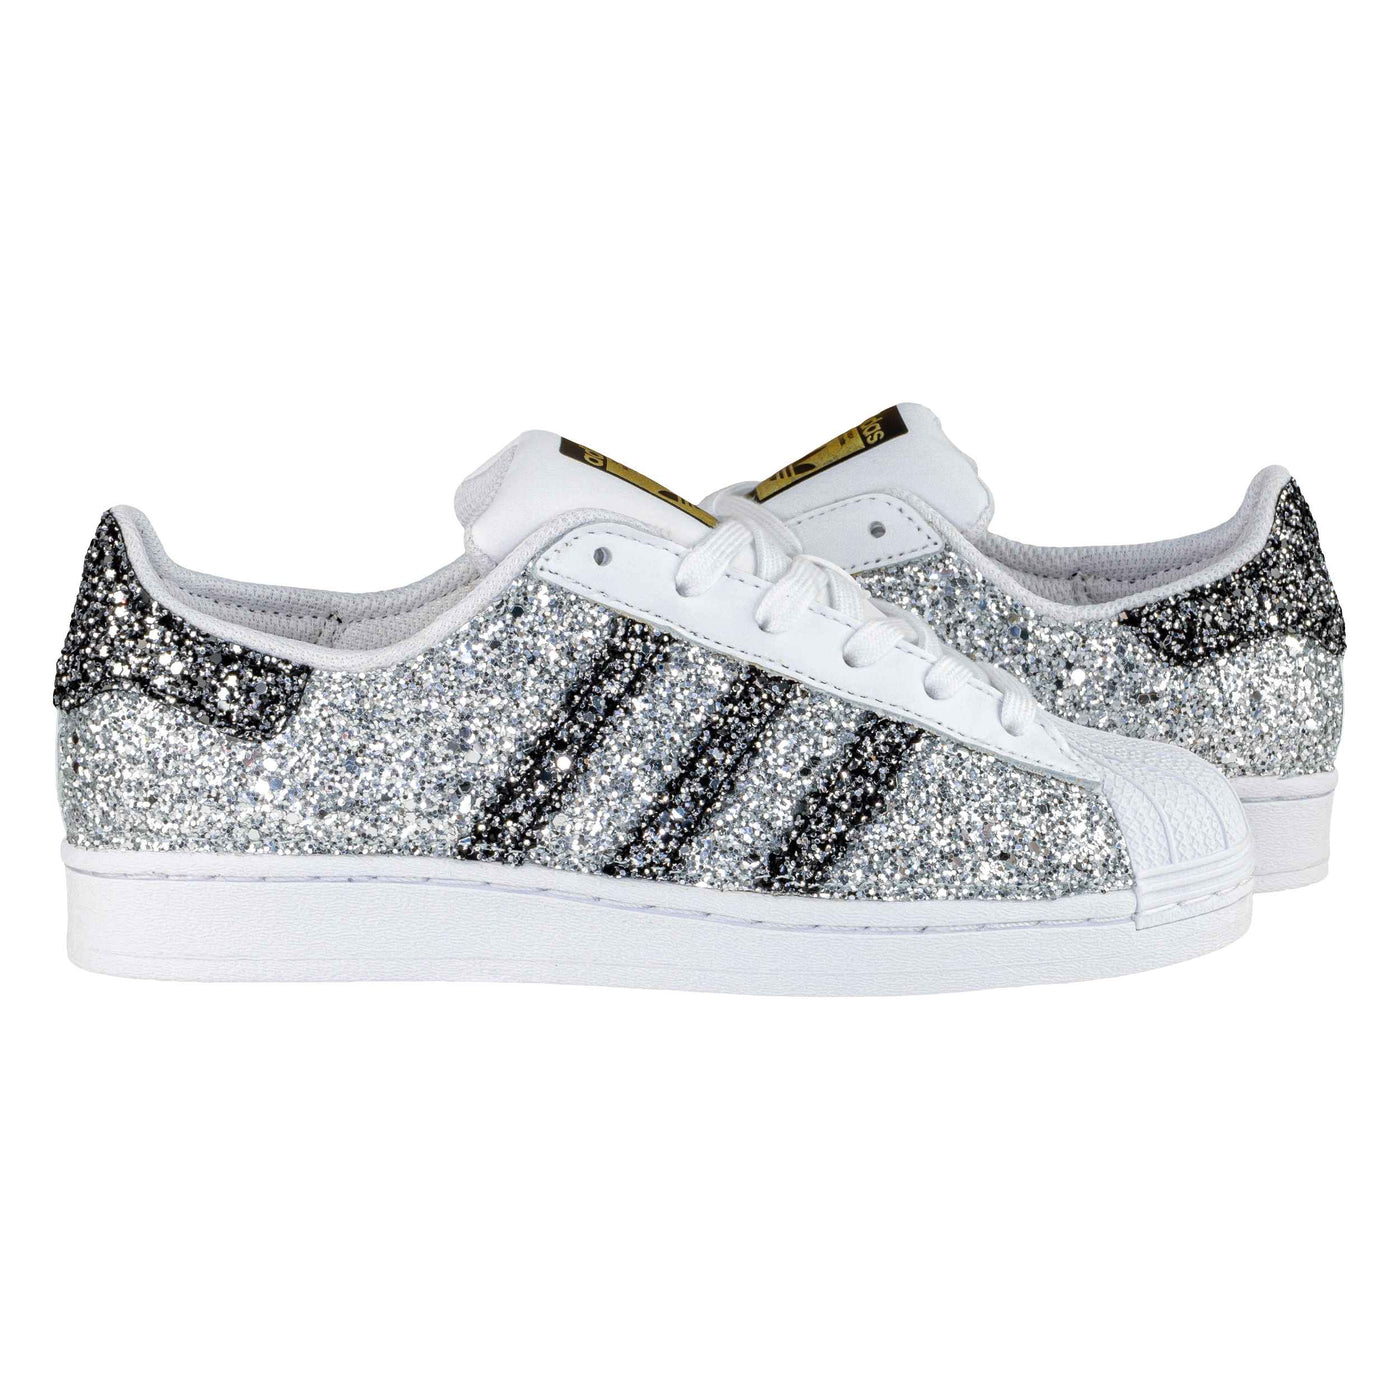 ADIDAS SUPERSTAR PERSONALIZZATE OLIVER